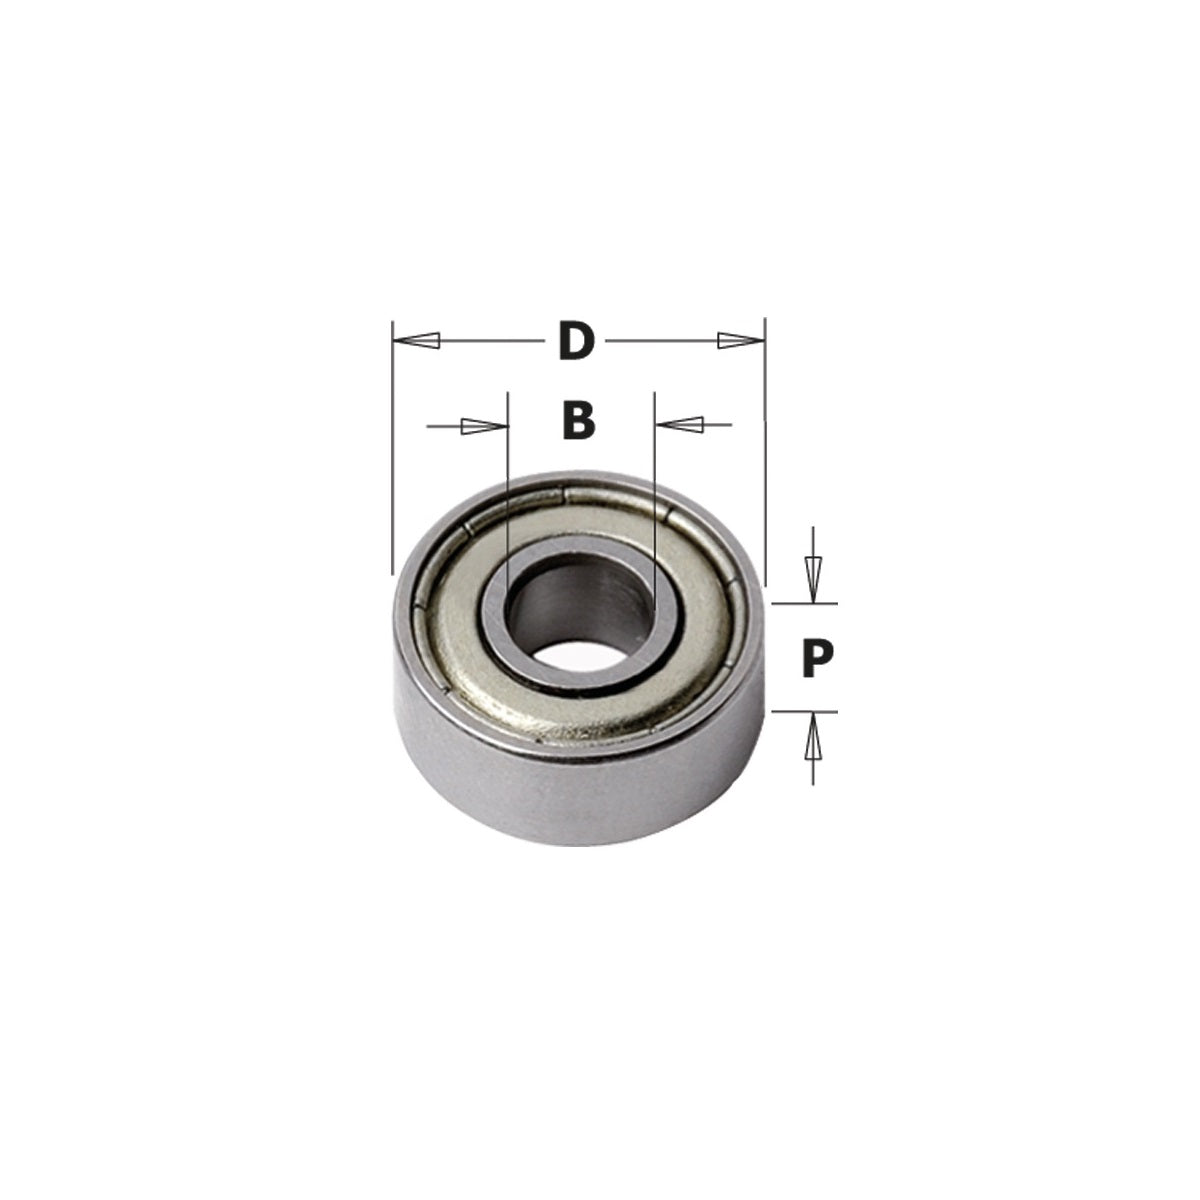 Replacement steel bearing for milling cutter, diameter 19 mm - CMT 791.004.00